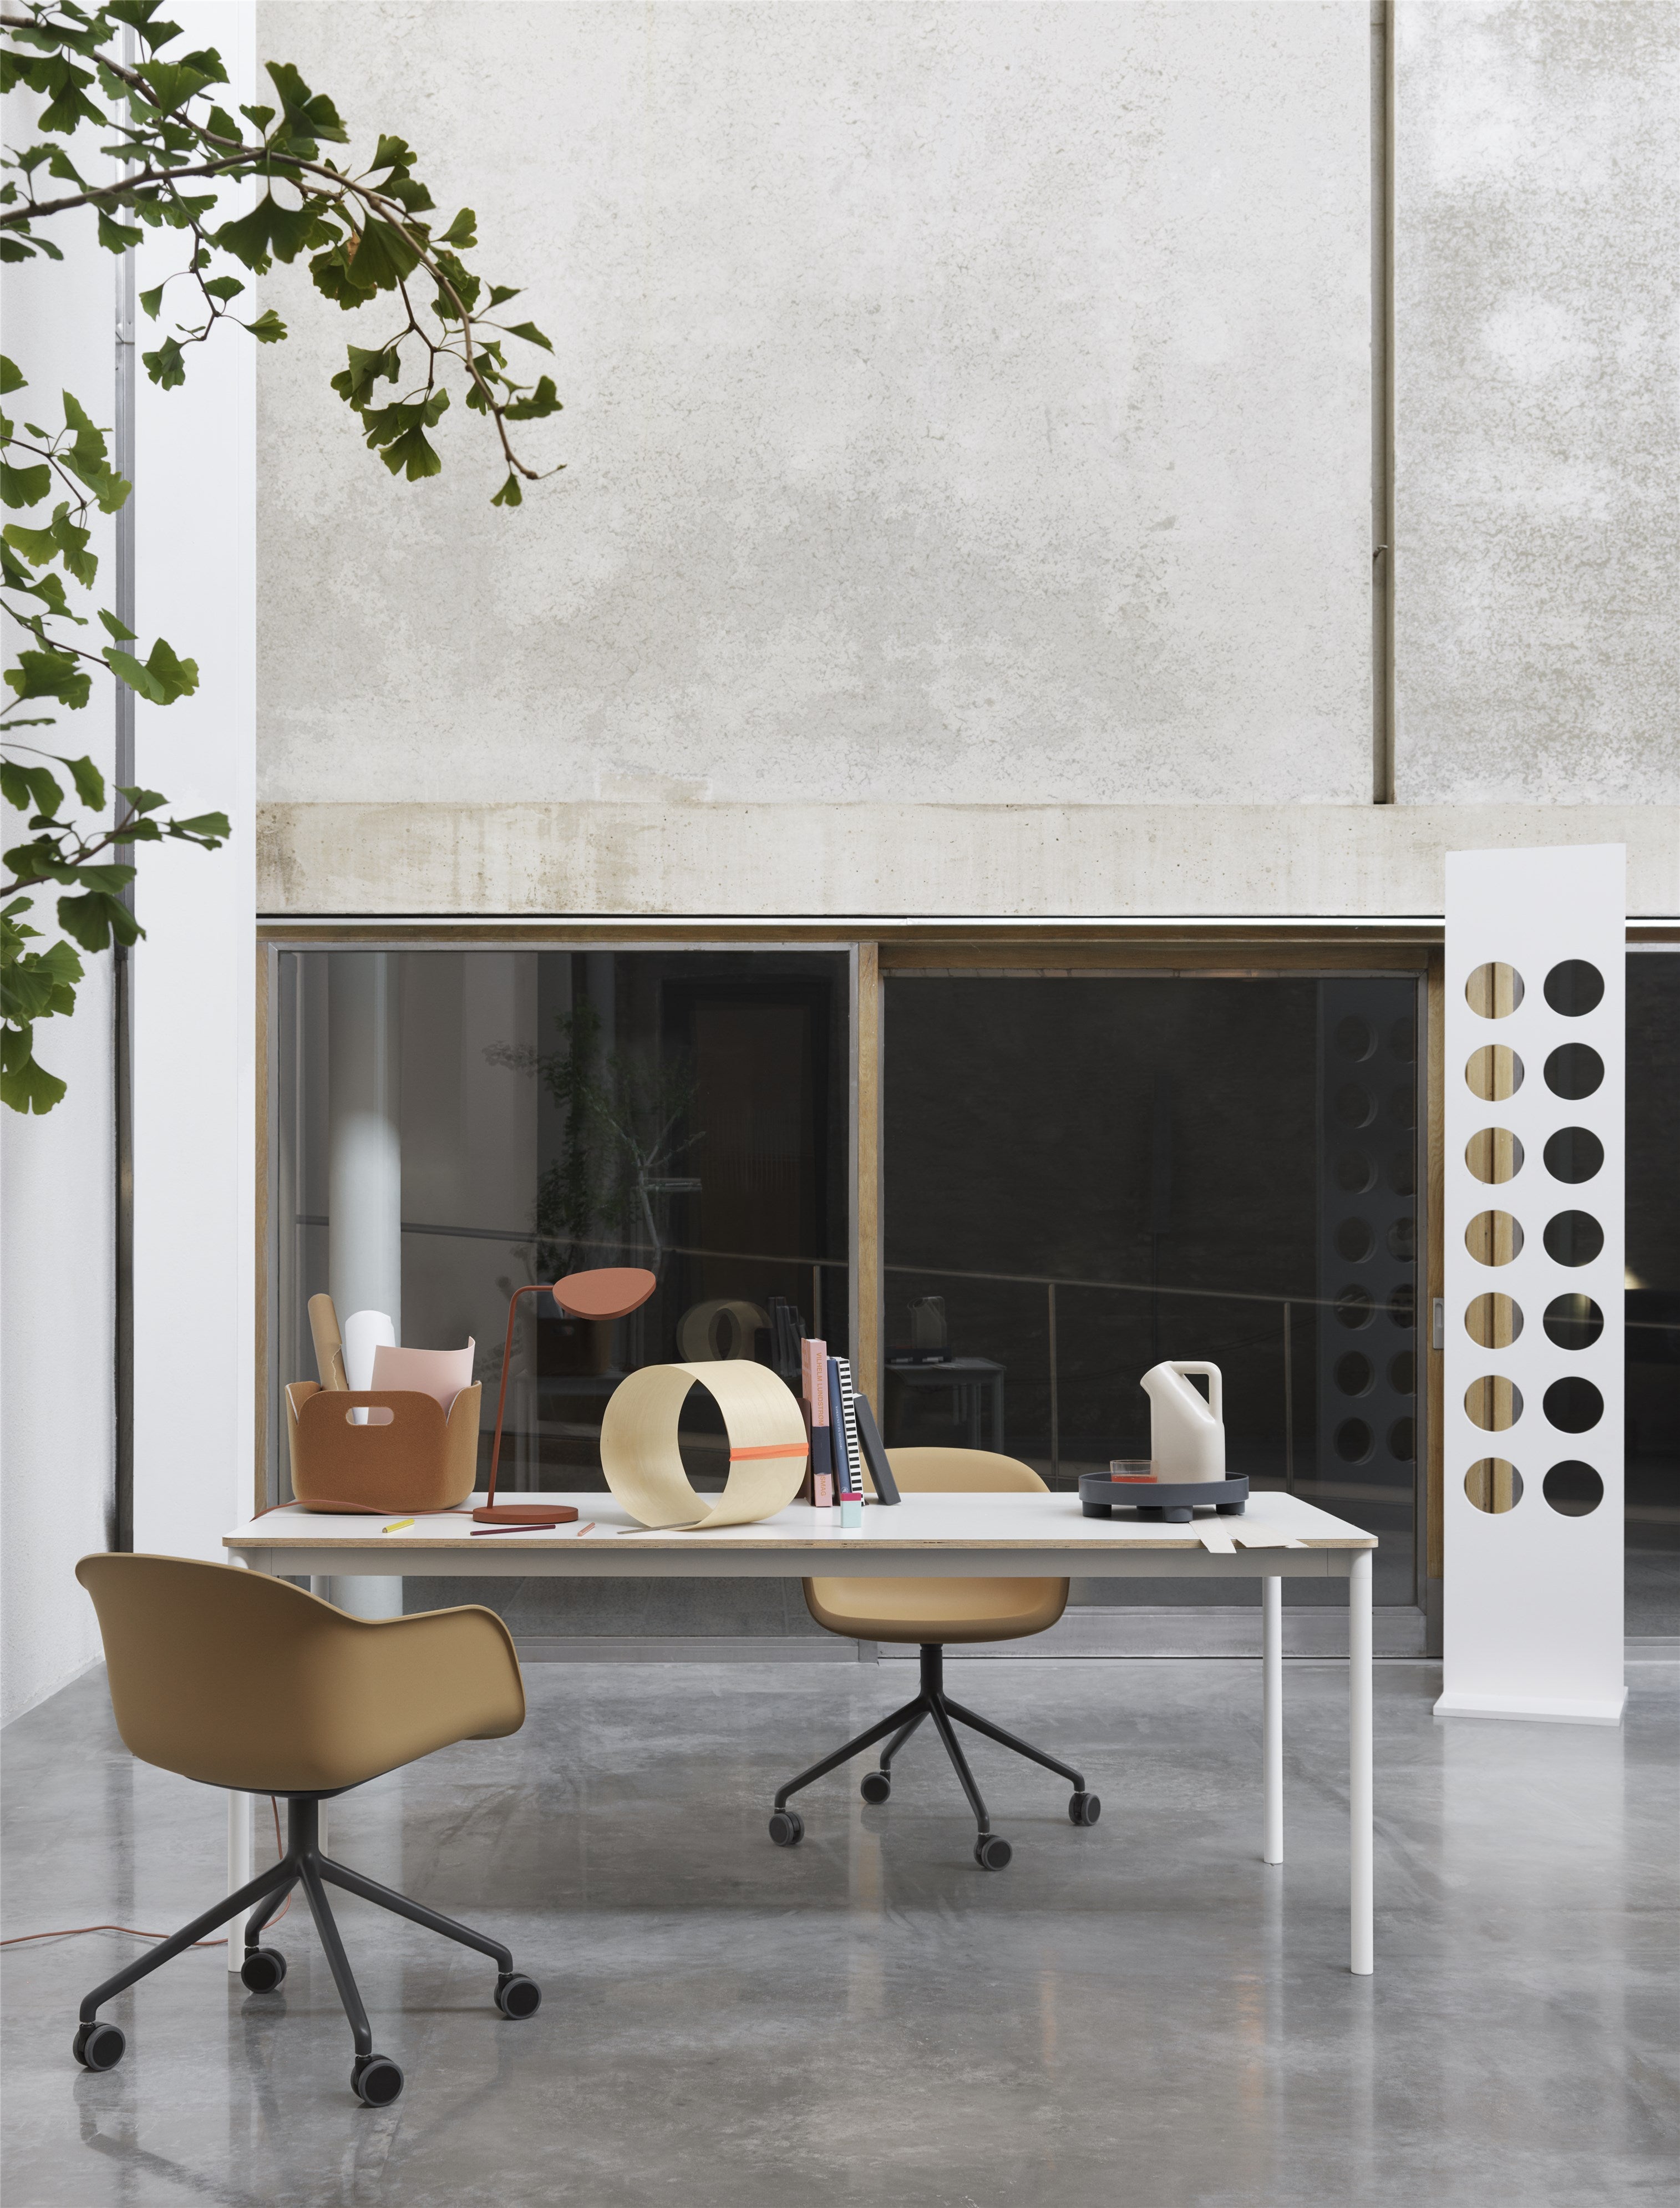 The Platform Tray by Sam Hekt and Kim Colin for Muuto fuses the function of Scandinavian design with Japanese artistry to form a stackable tray with a multitude of uses.